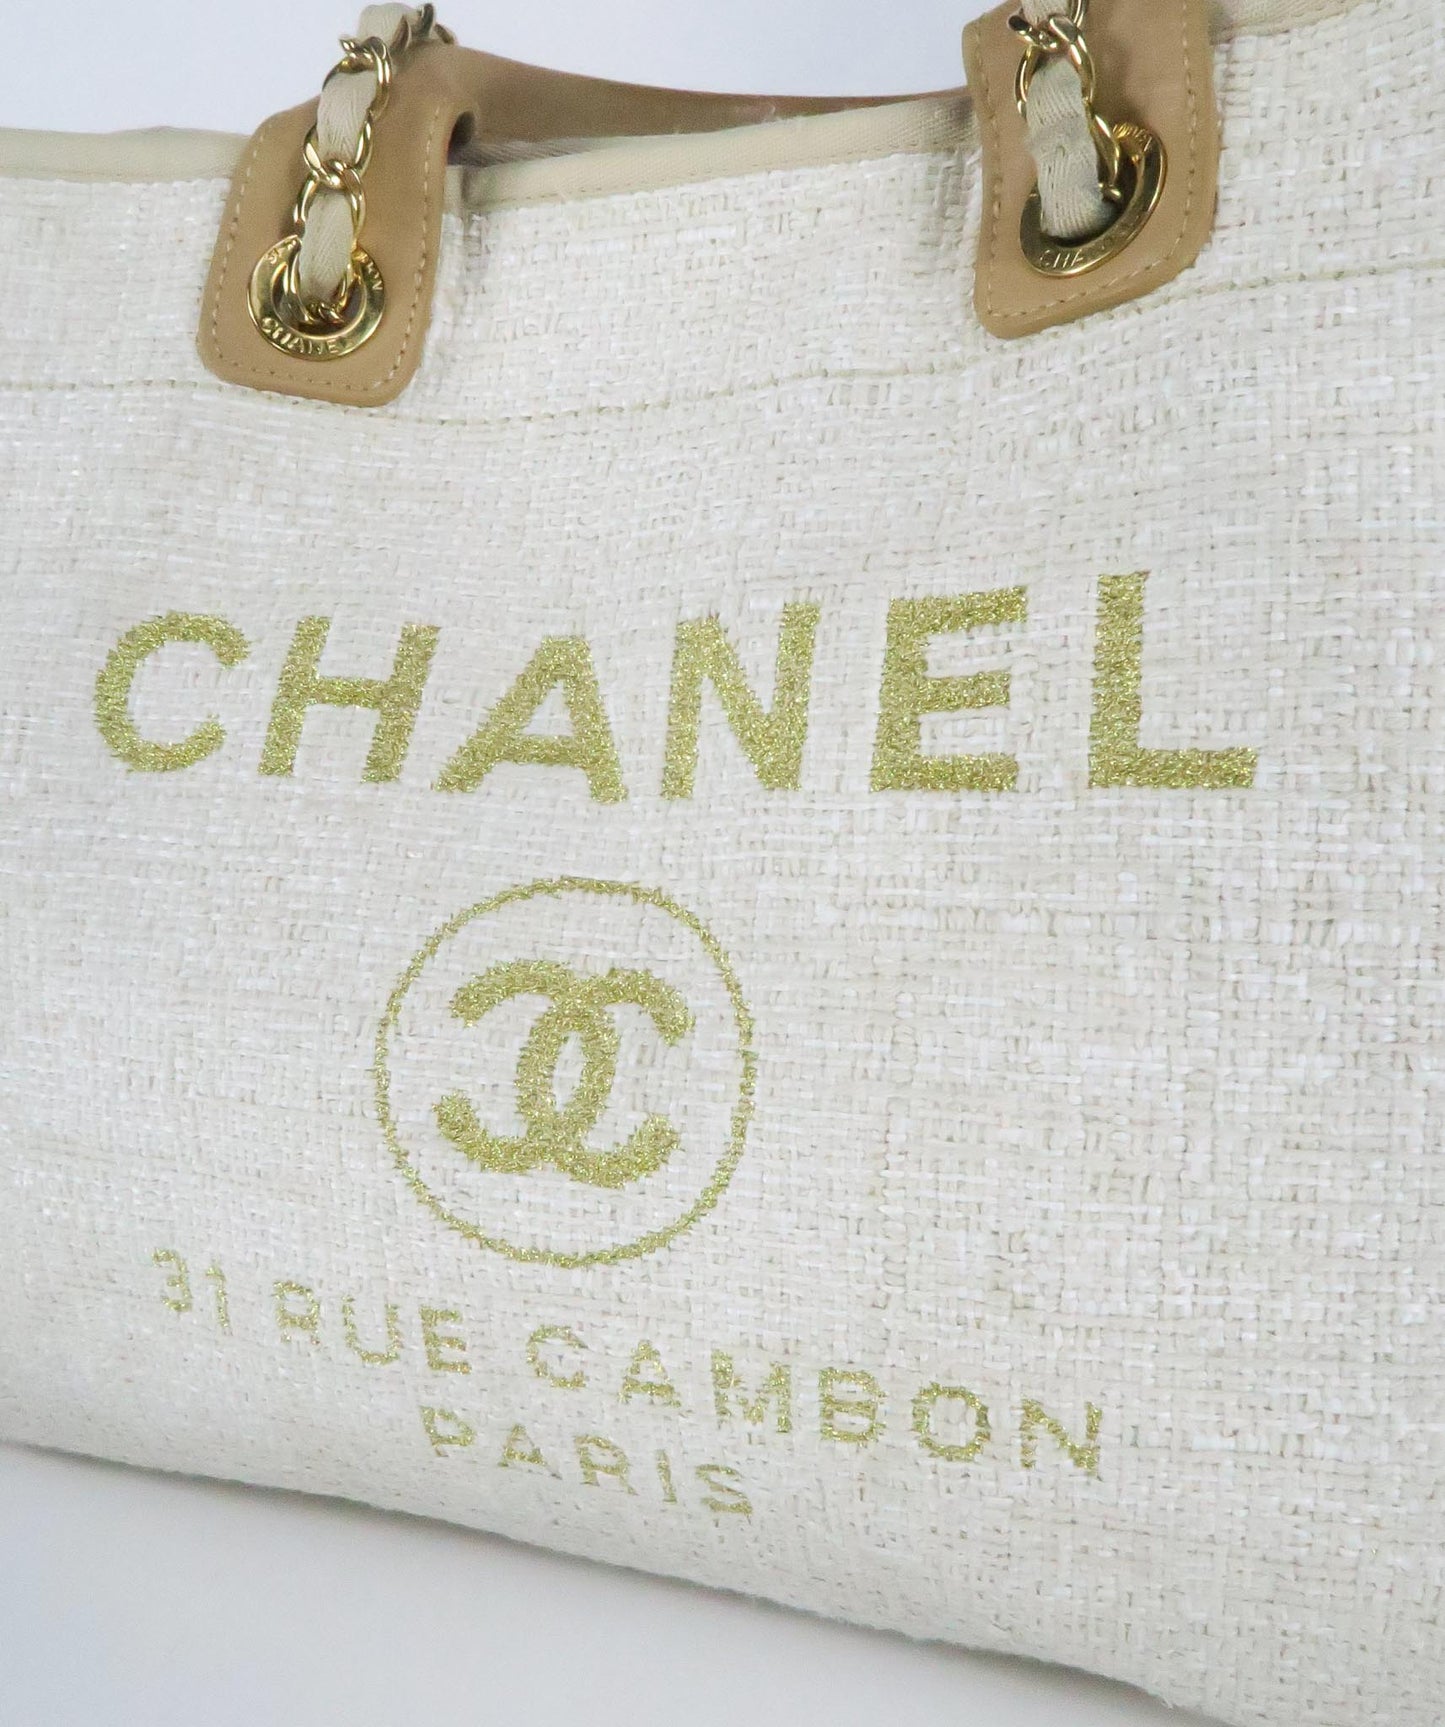 Chanel Cream Ivory Large Tweed Deauville Tote Bag